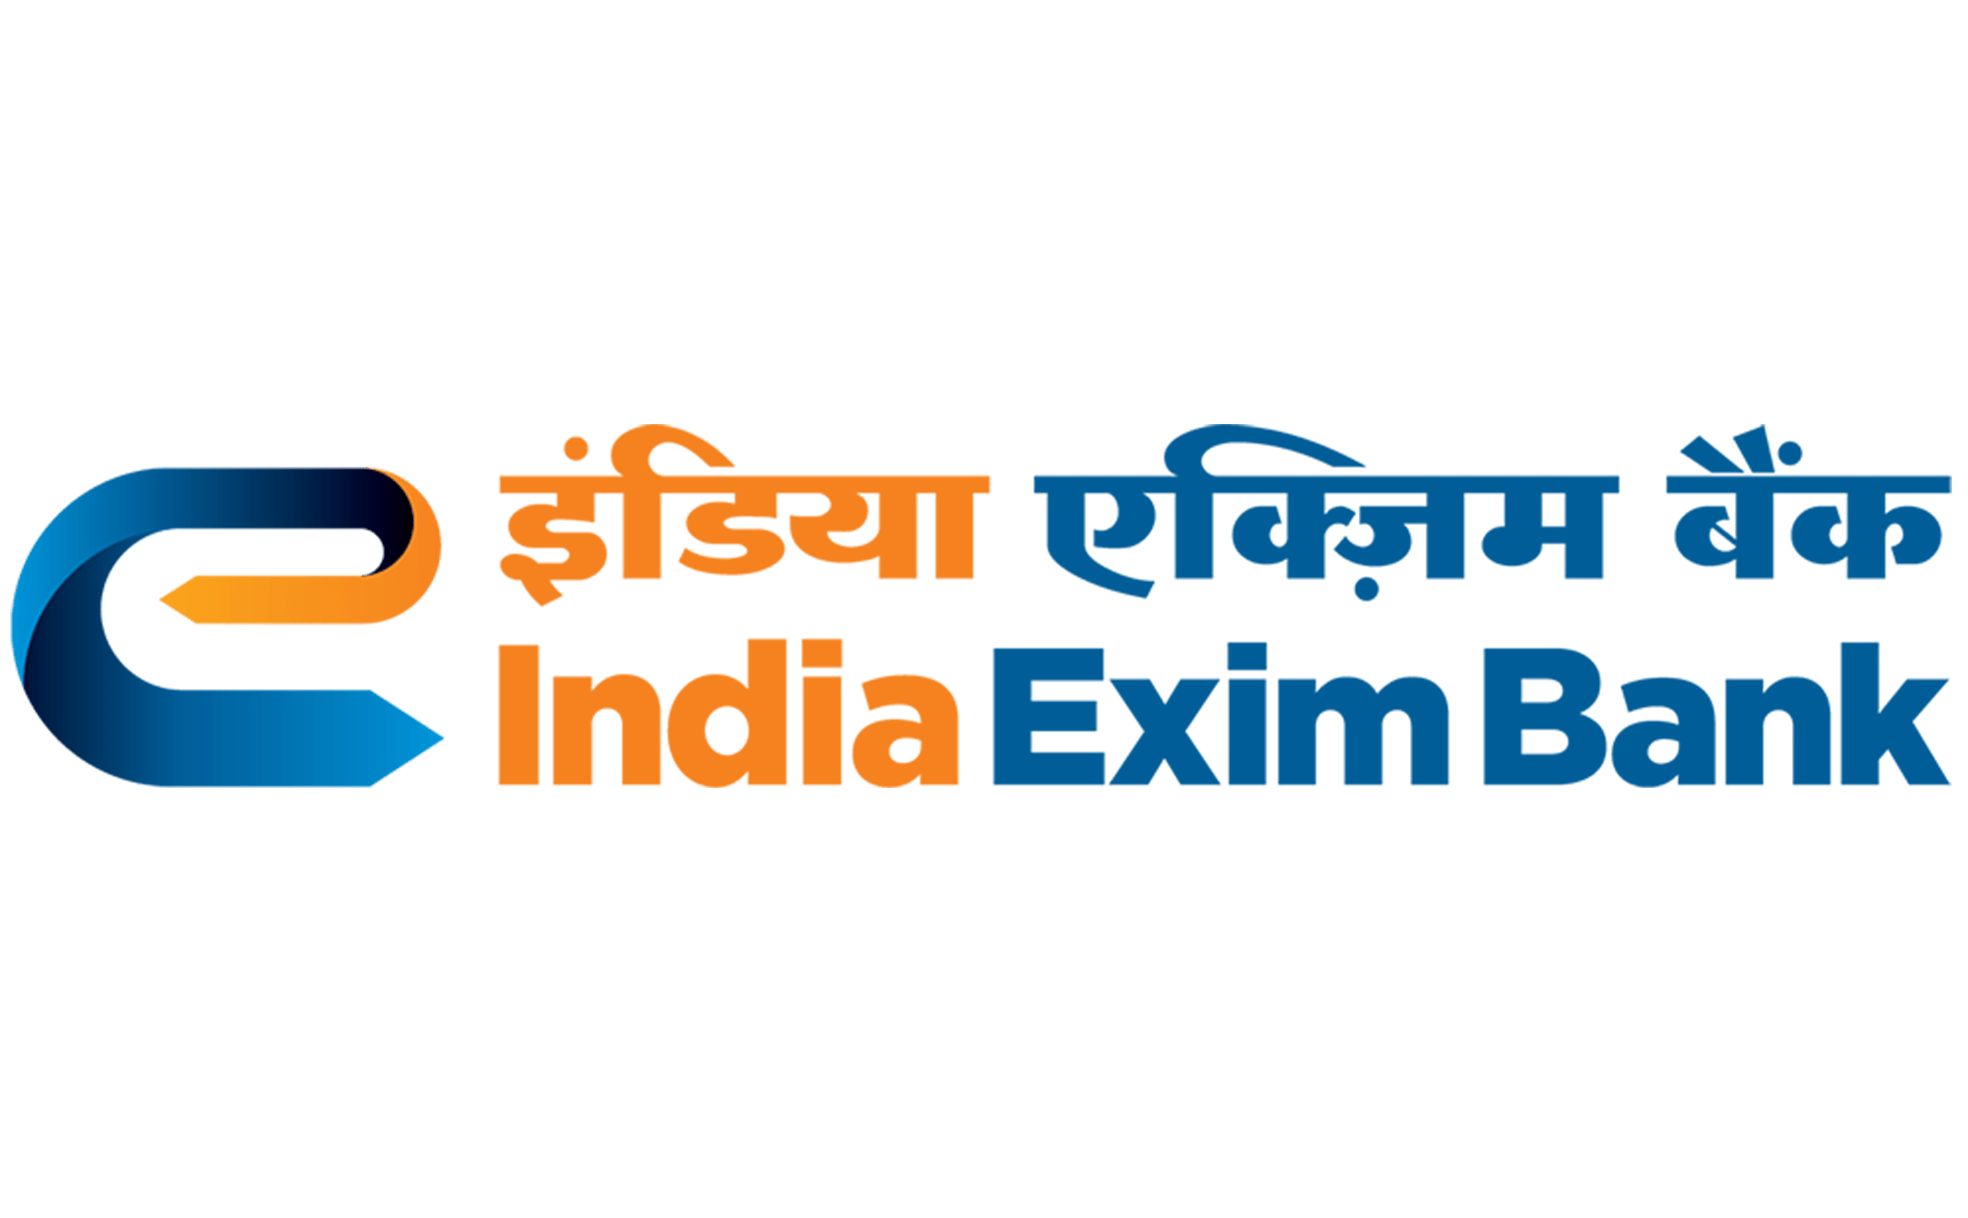 Exim Bank India extends Line of Credit to Eswatini (Swaziland) - ADFIAP